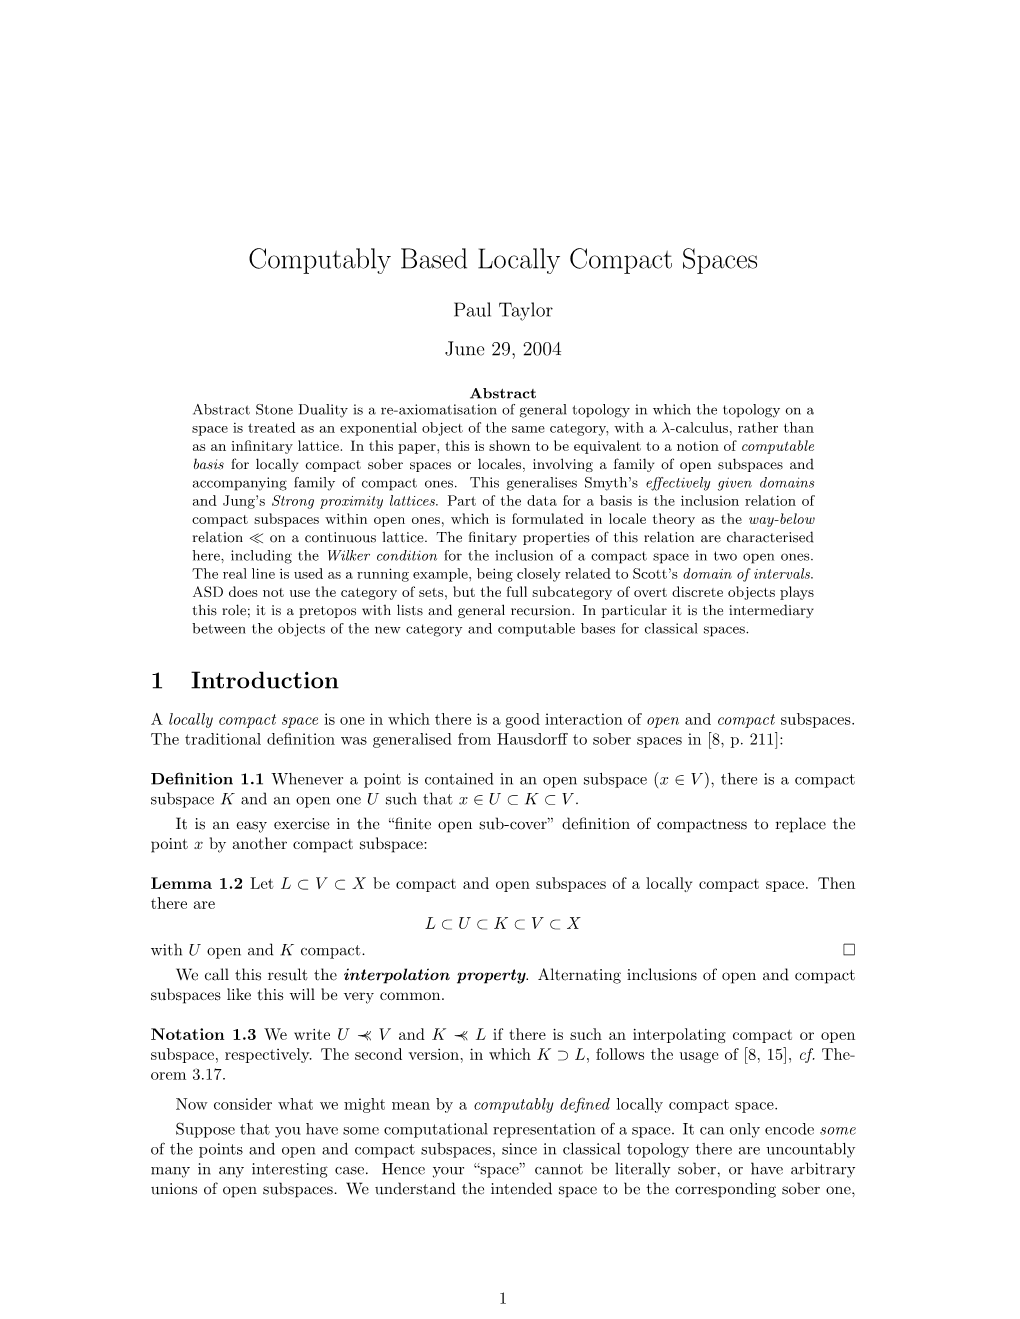 Computably Based Locally Compact Spaces